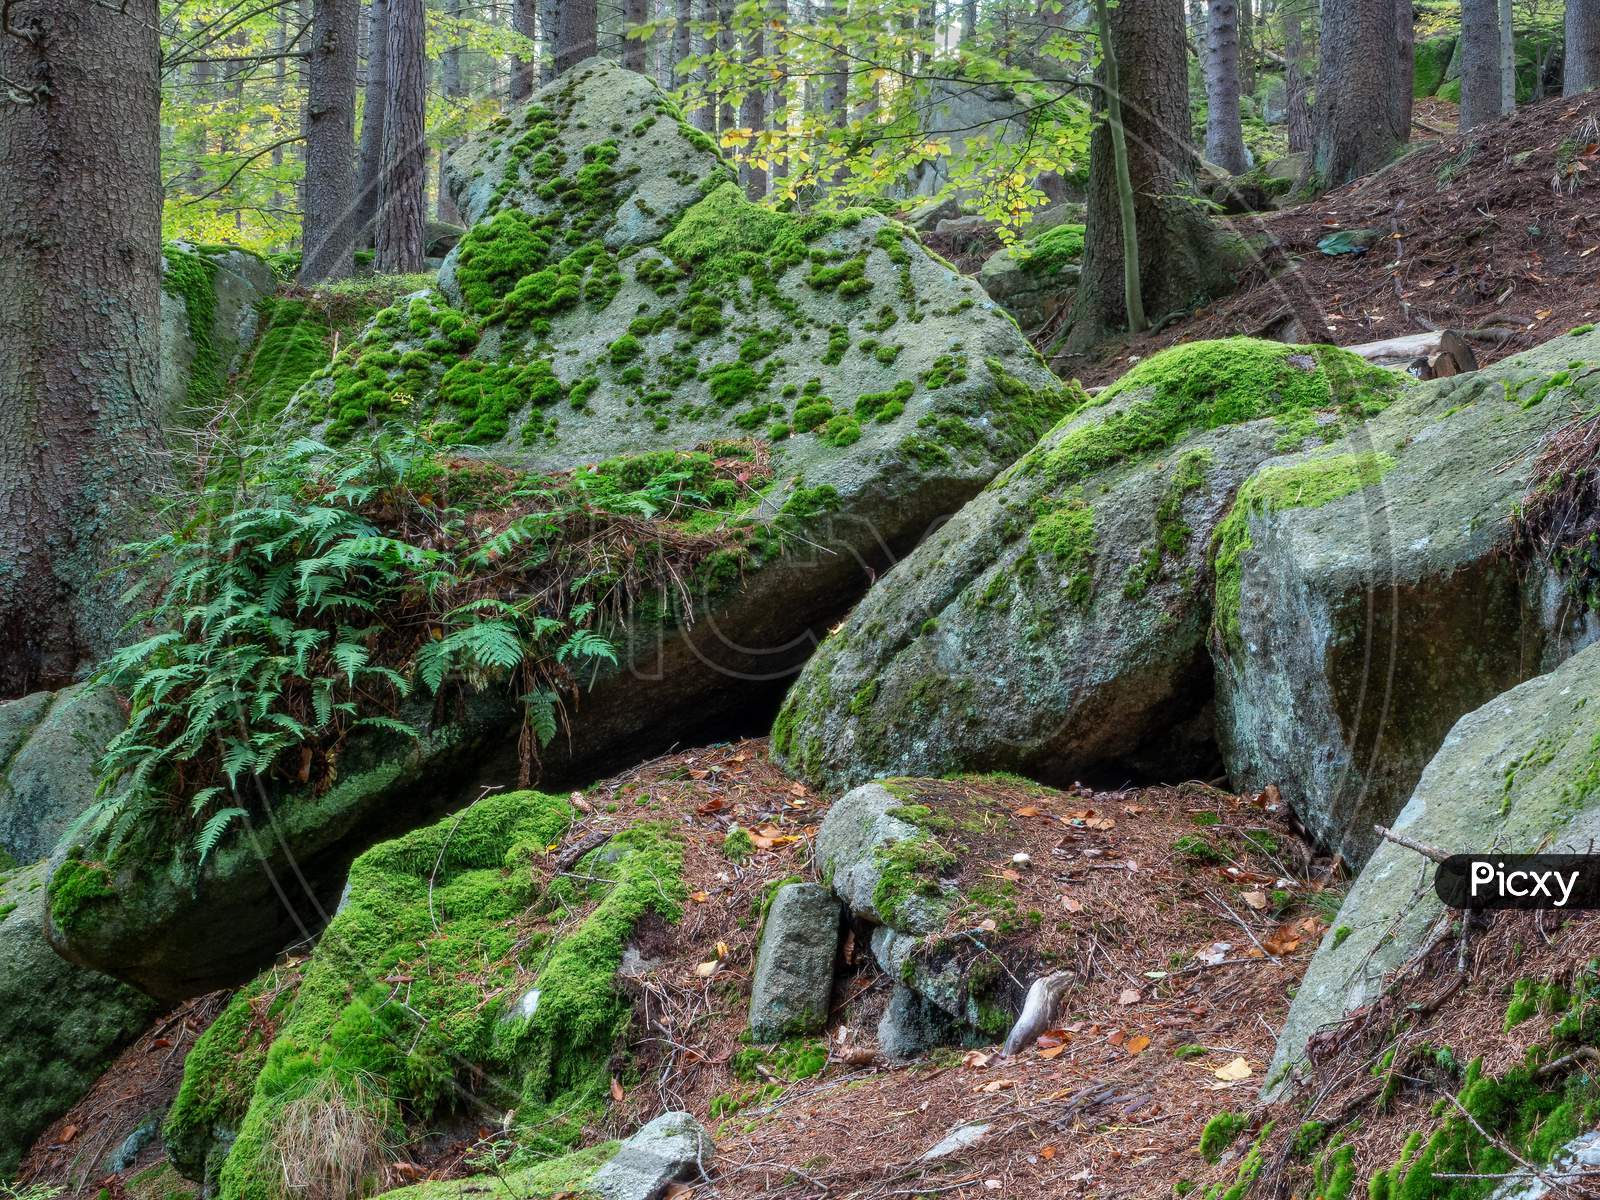 Granite Rocks Covered With Moss And Ferns In Vivid Green Colors.